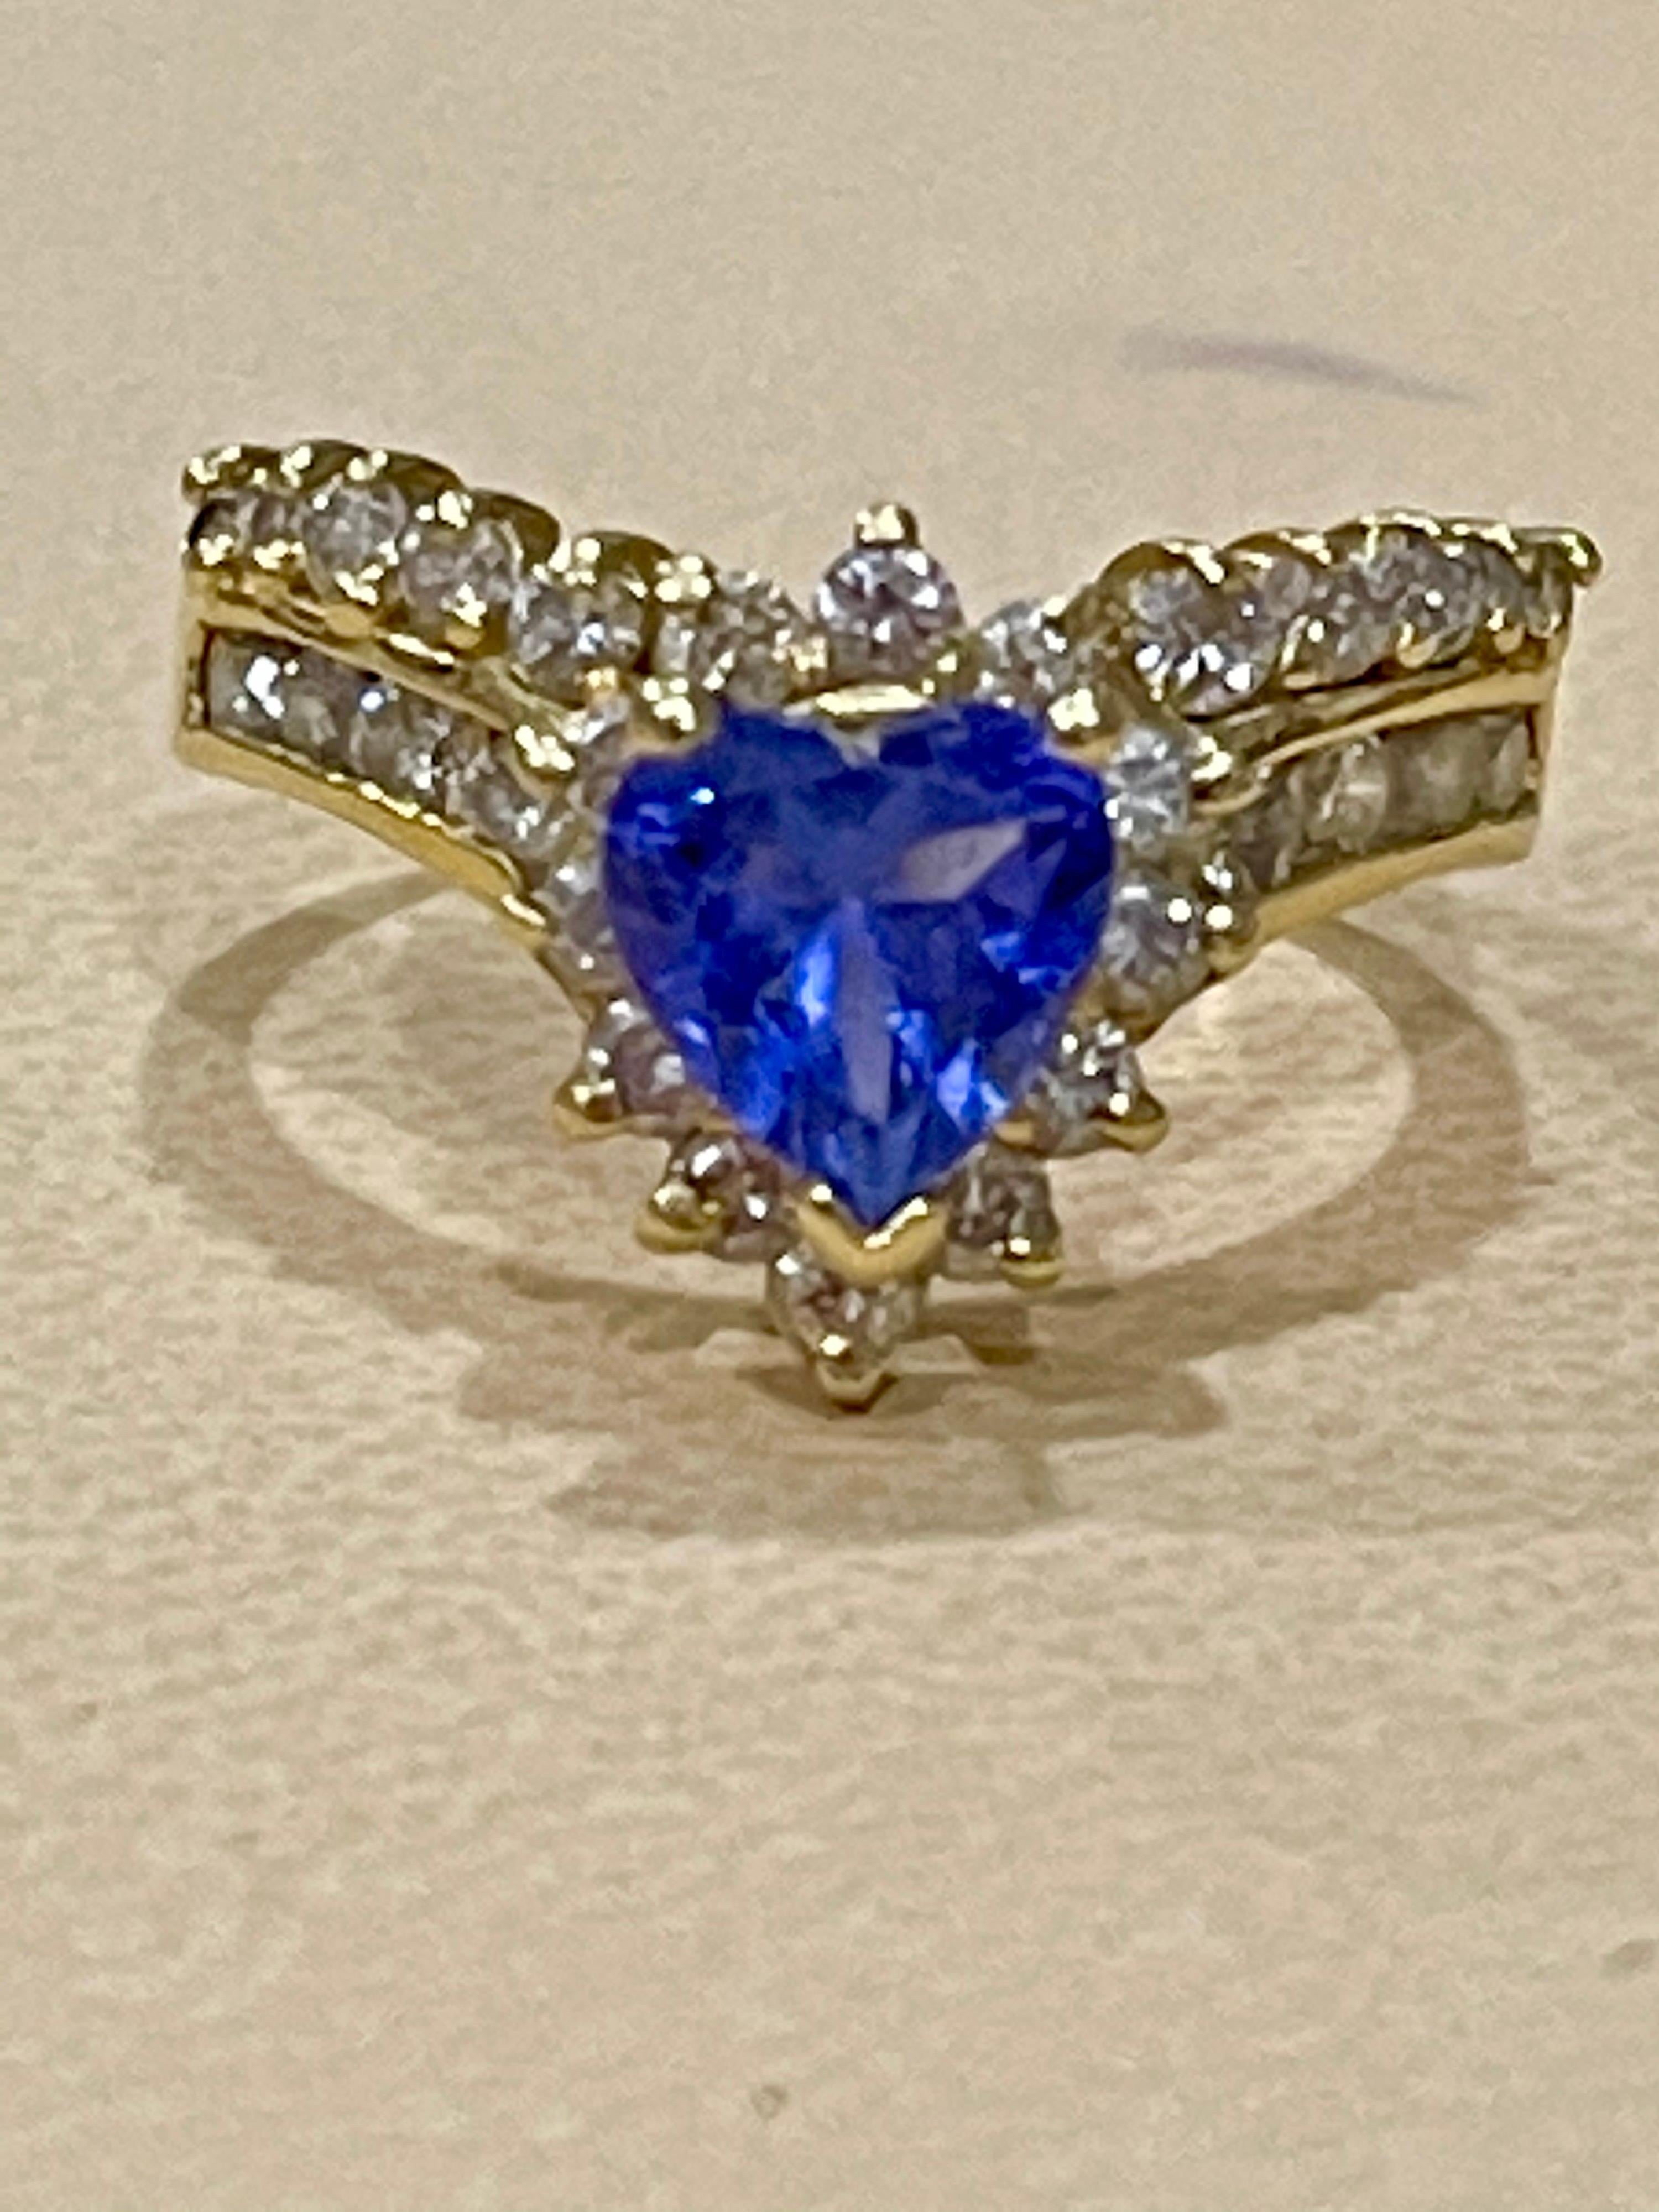 Approximately 1.25 Carat Heart Shape Tanzanite and Approximately 1.5 Carat Diamond Ring 14 Karat Yellow Gold
There are  total  of 1.5 carats of shimmering white diamonds, this brilliant Heart cut  gem exhibits the rich violetish-blue color for which